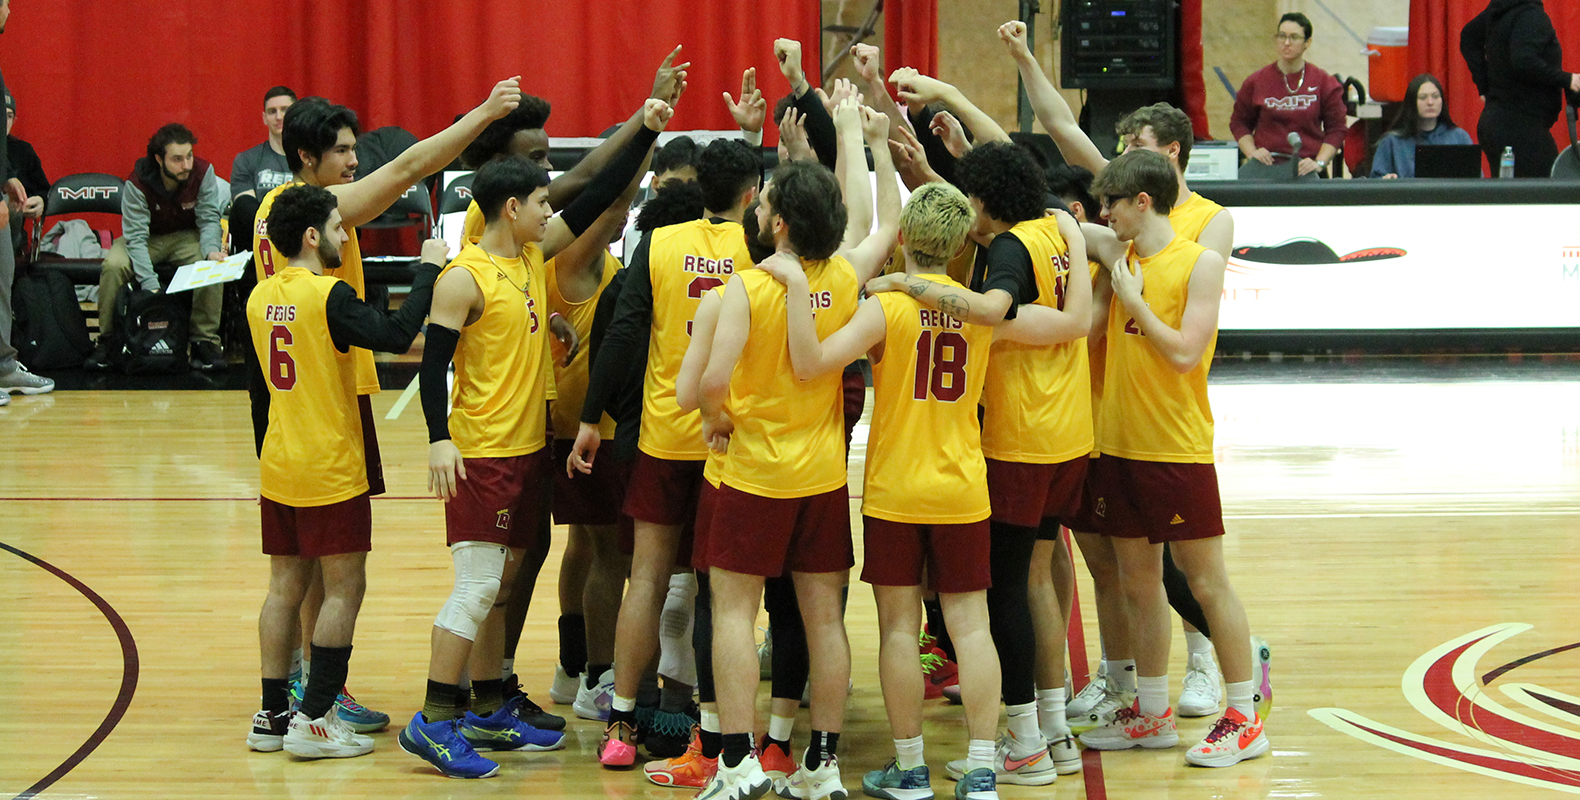 Men’s Volleyball Loses in Tri-Match in Pennsylvania